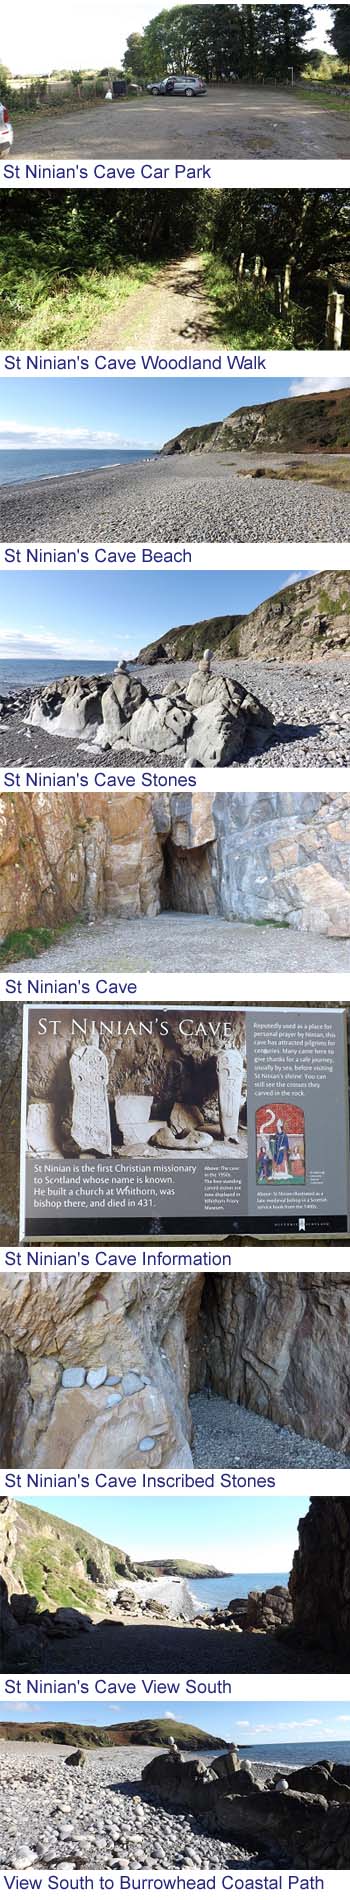 St Ninian's Cave Images